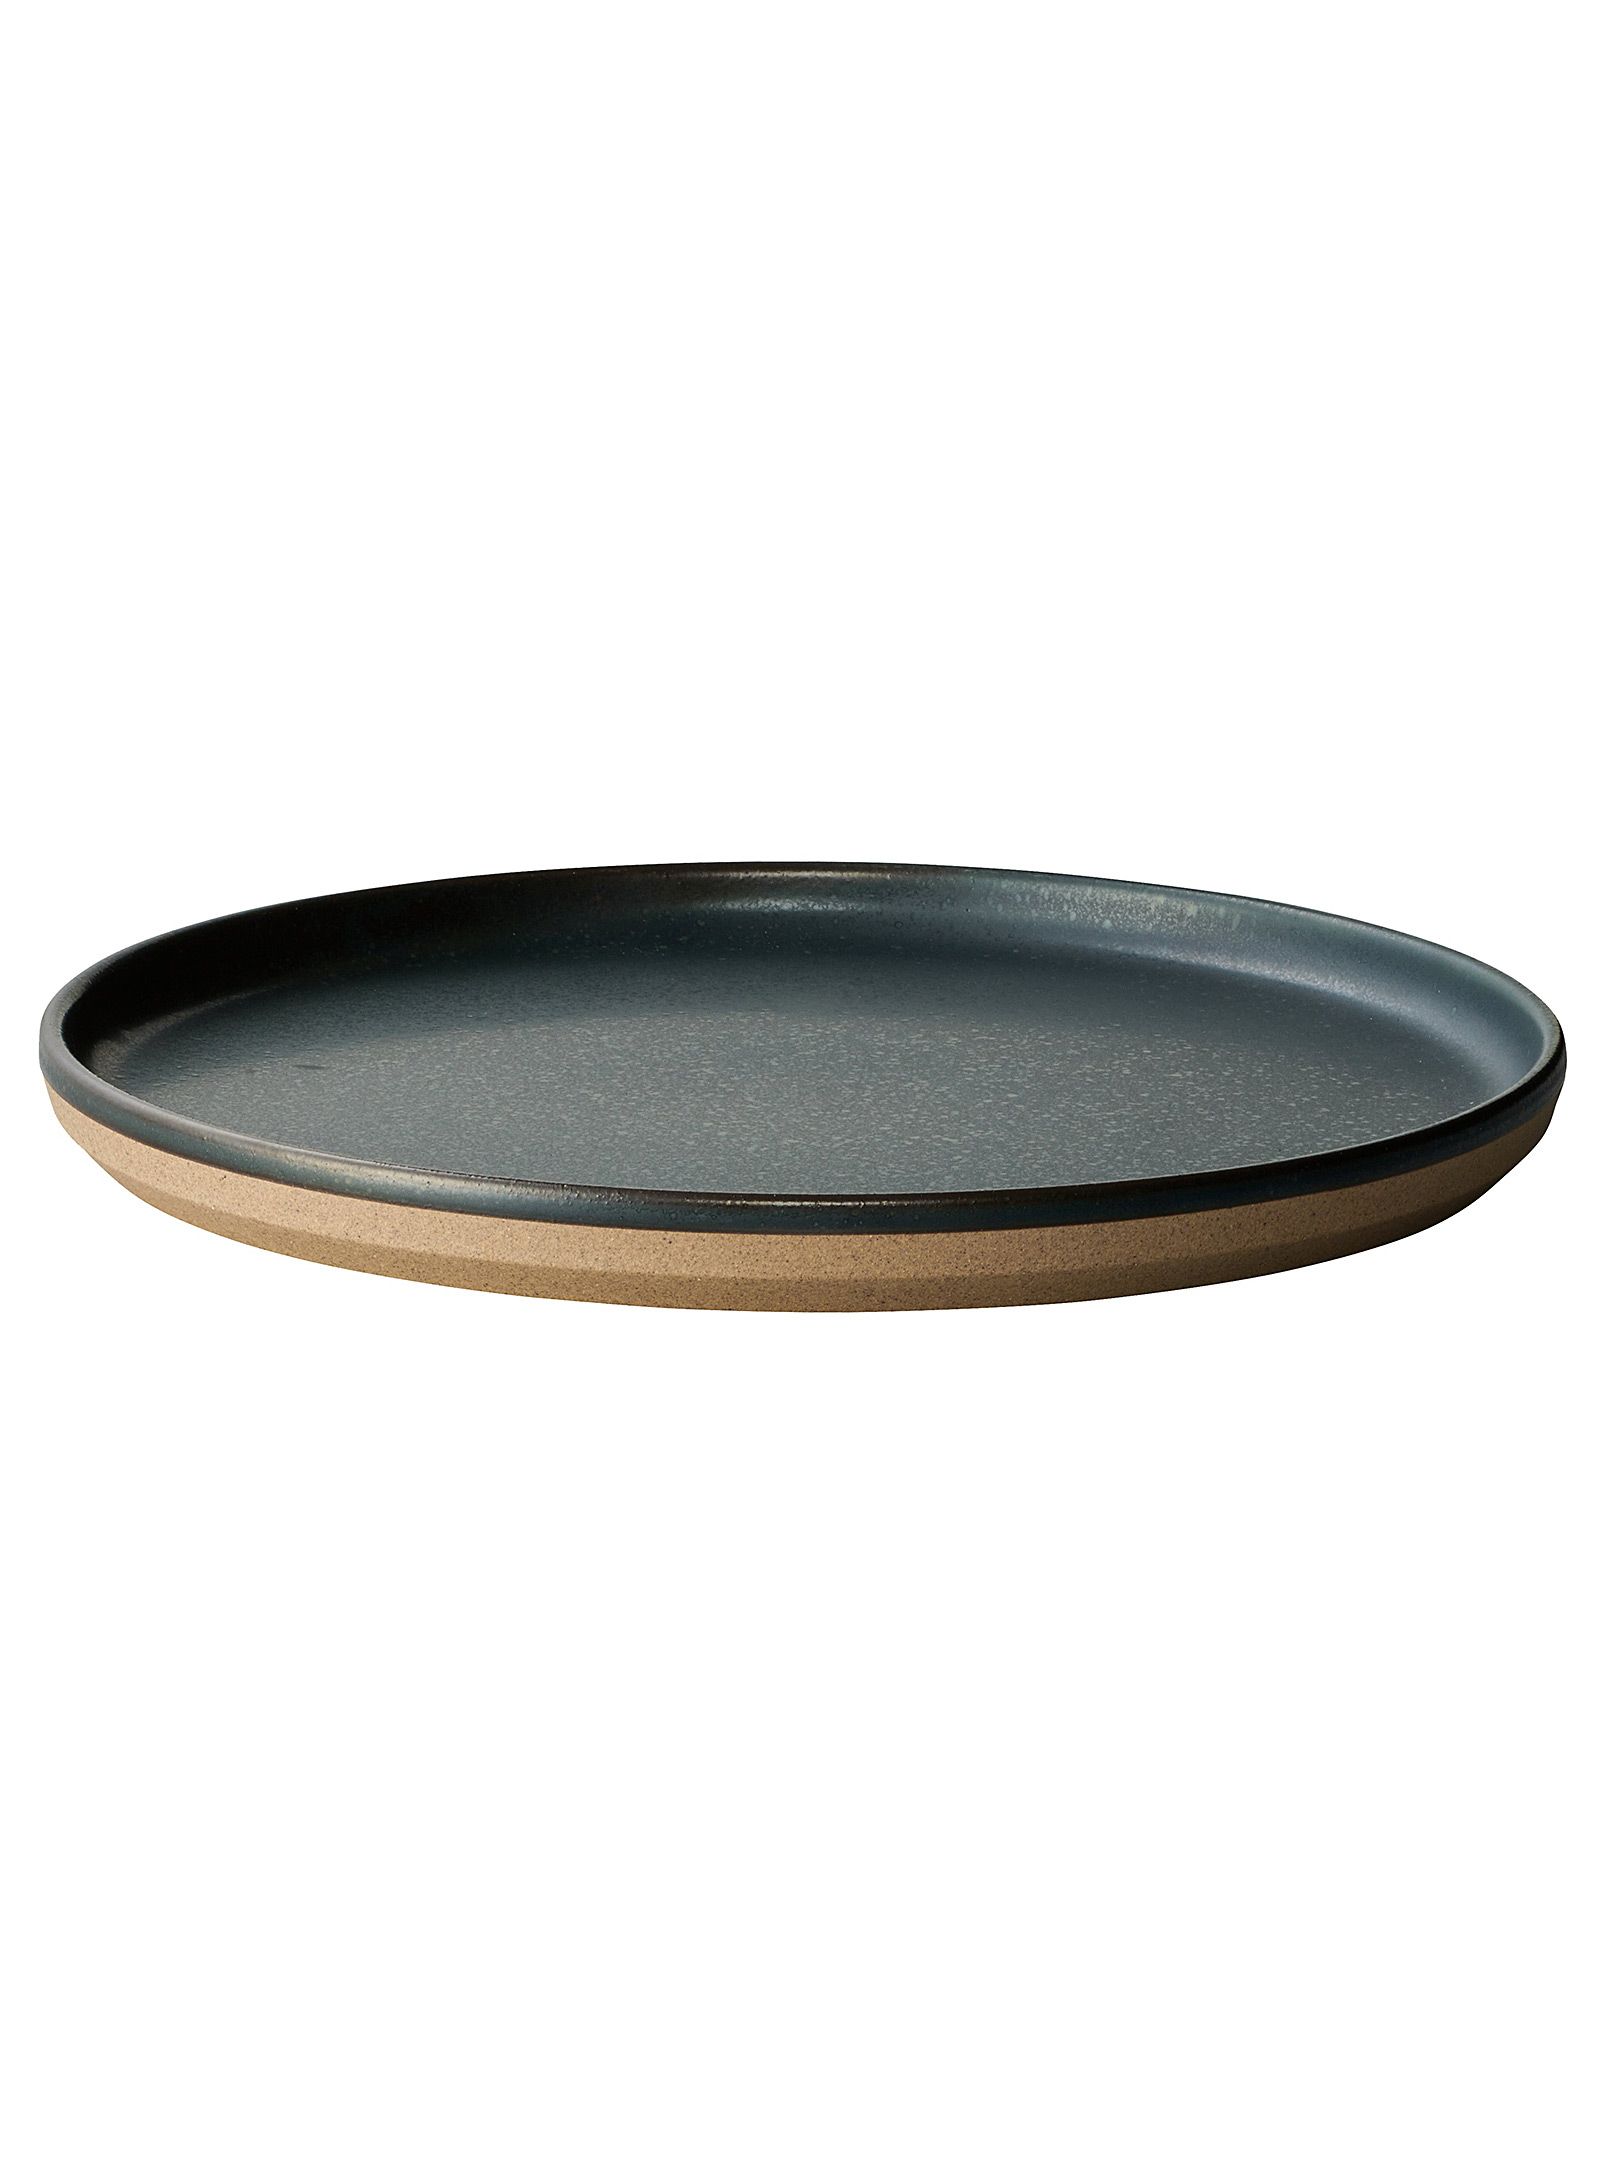 Kinto Two-tone Porcelain Plates Set Of 3 In Black